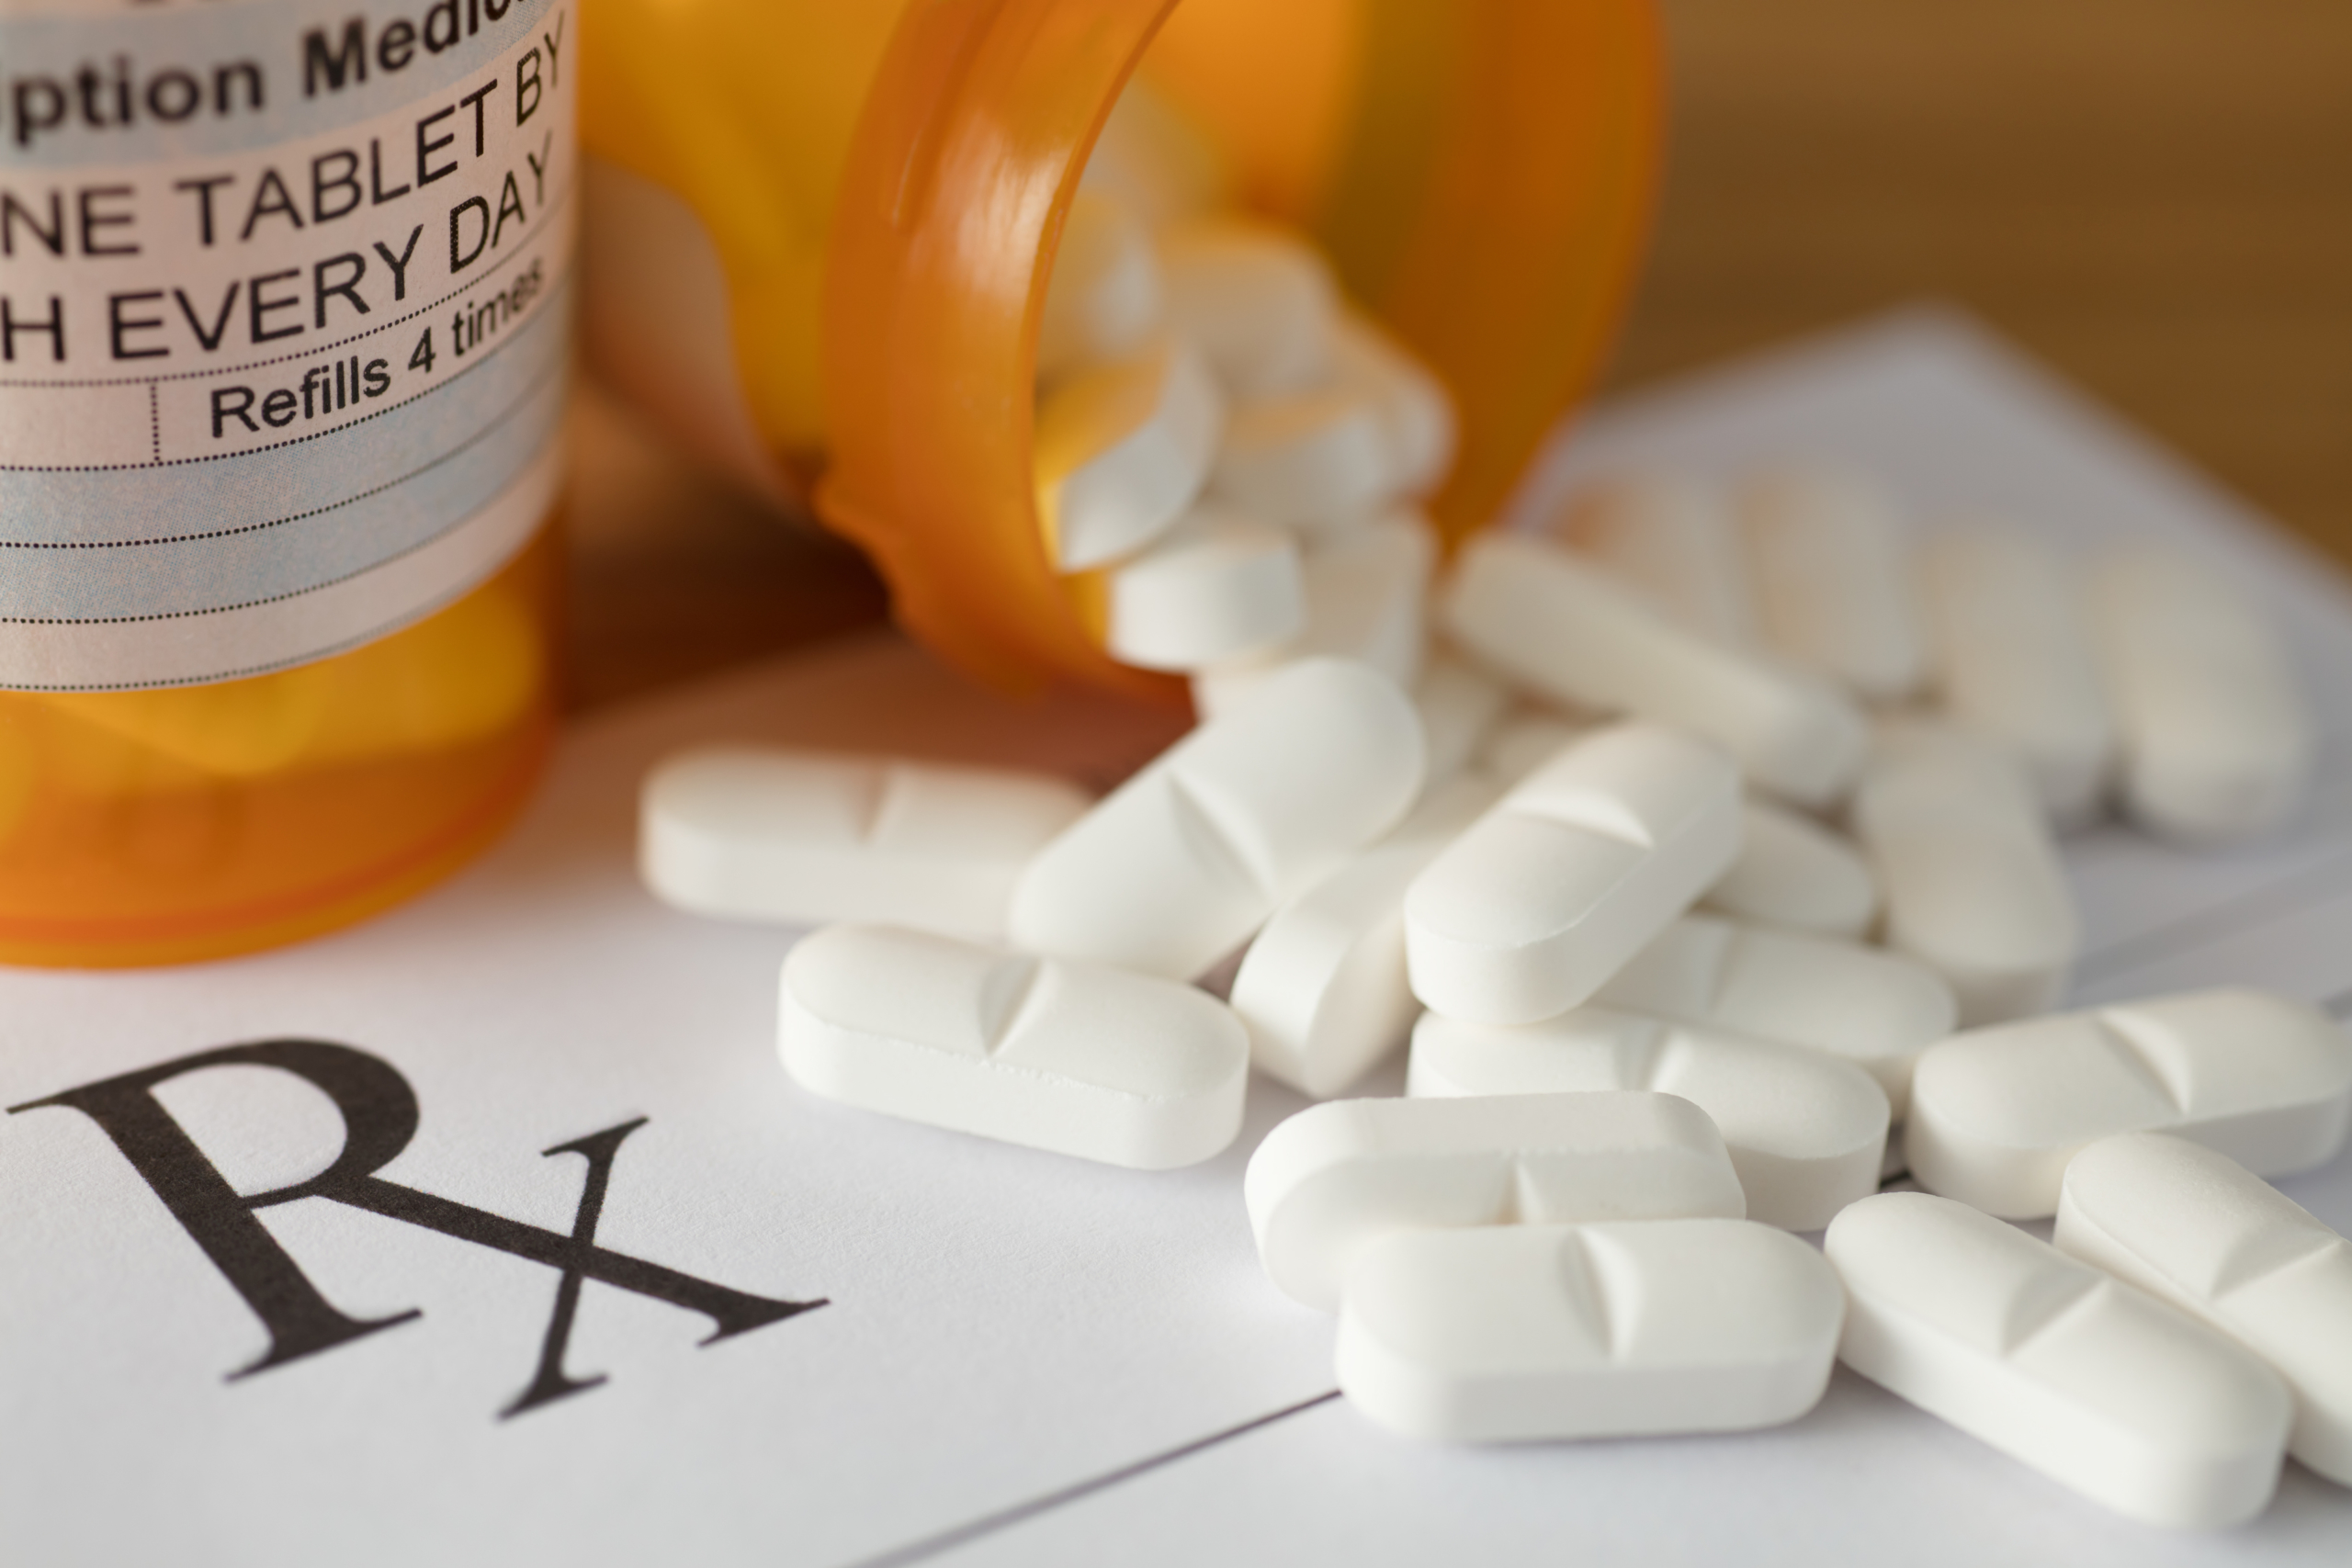 What to Consider Before Filing a Wrong Prescription or Medication Lawsuit